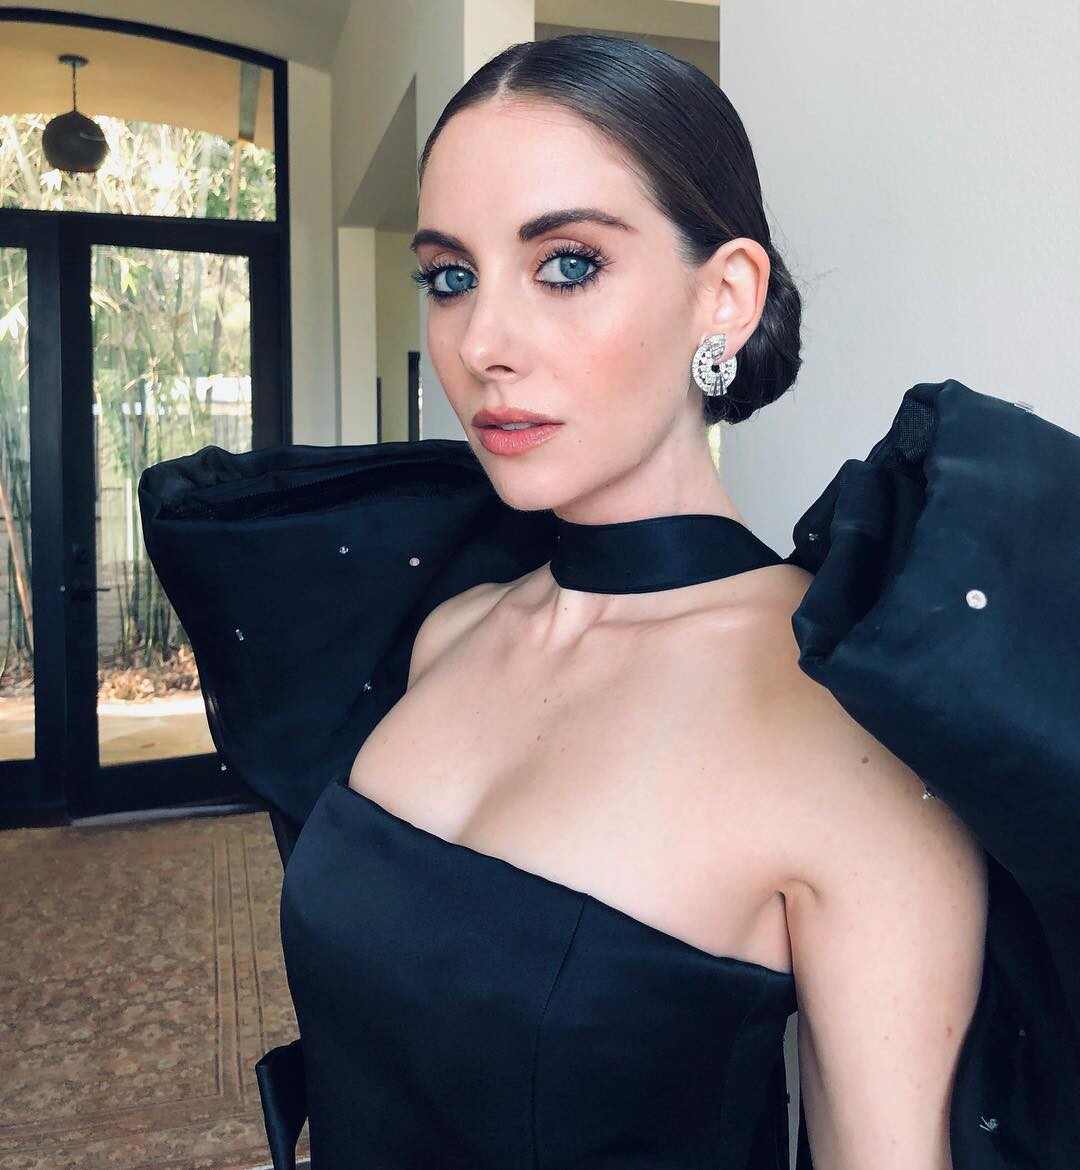 Alison Brie from SAG Awards 2019: Instagram & TwitPics | E! News